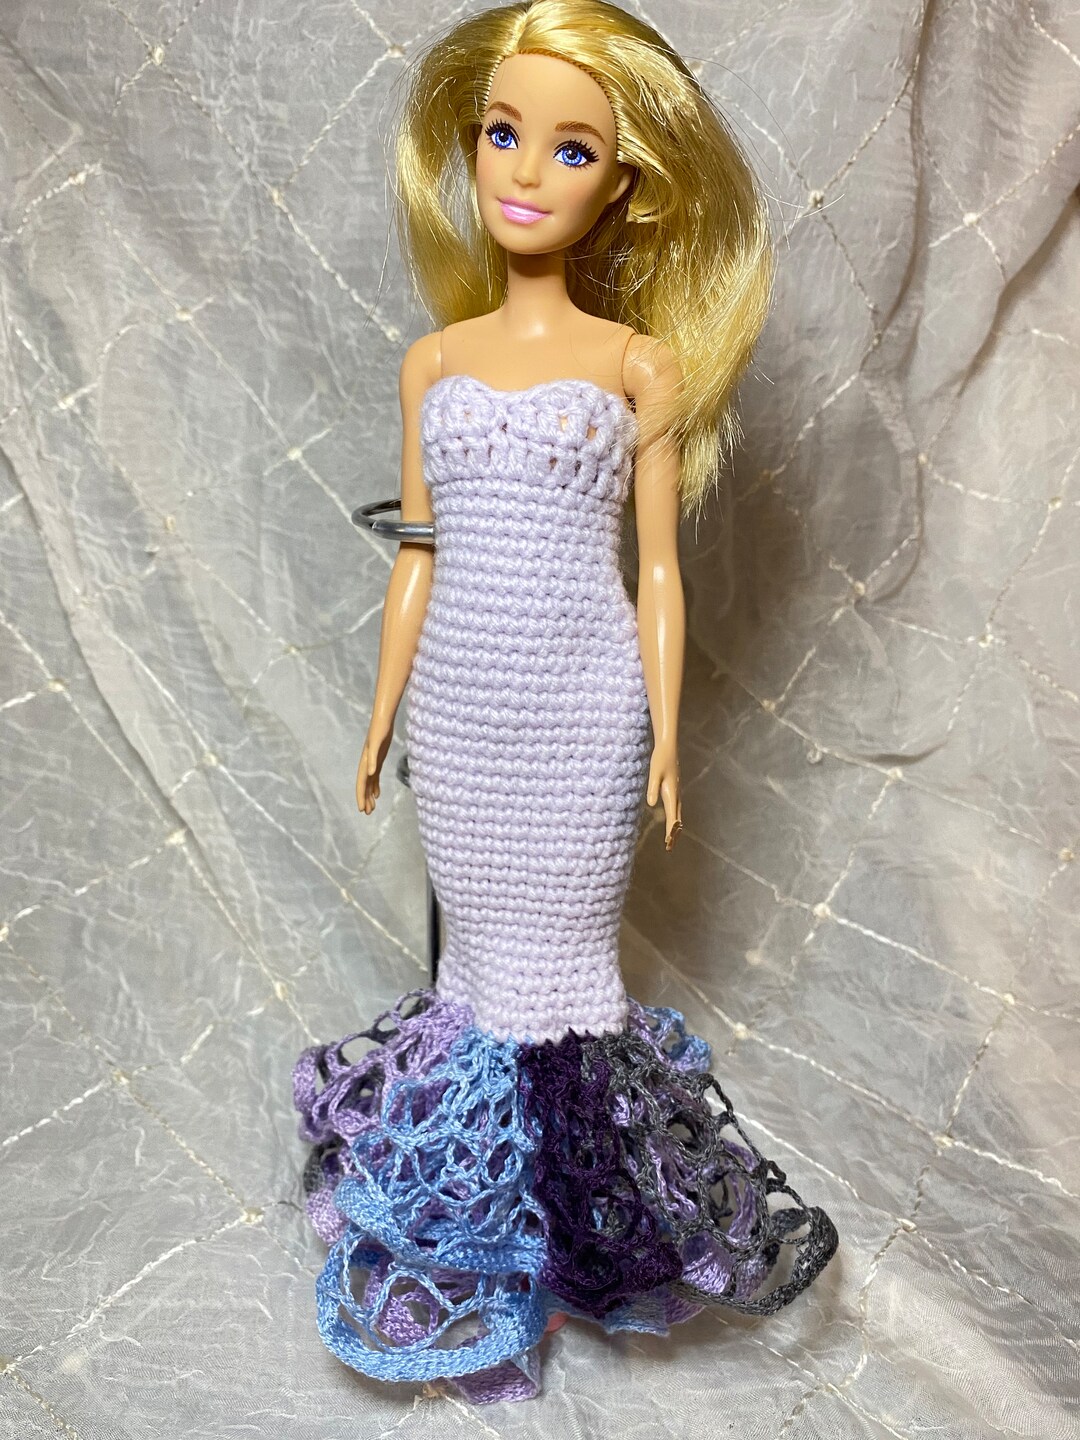 Mermaid Gown | Doll dress, Barbie gowns, Pink doll dress